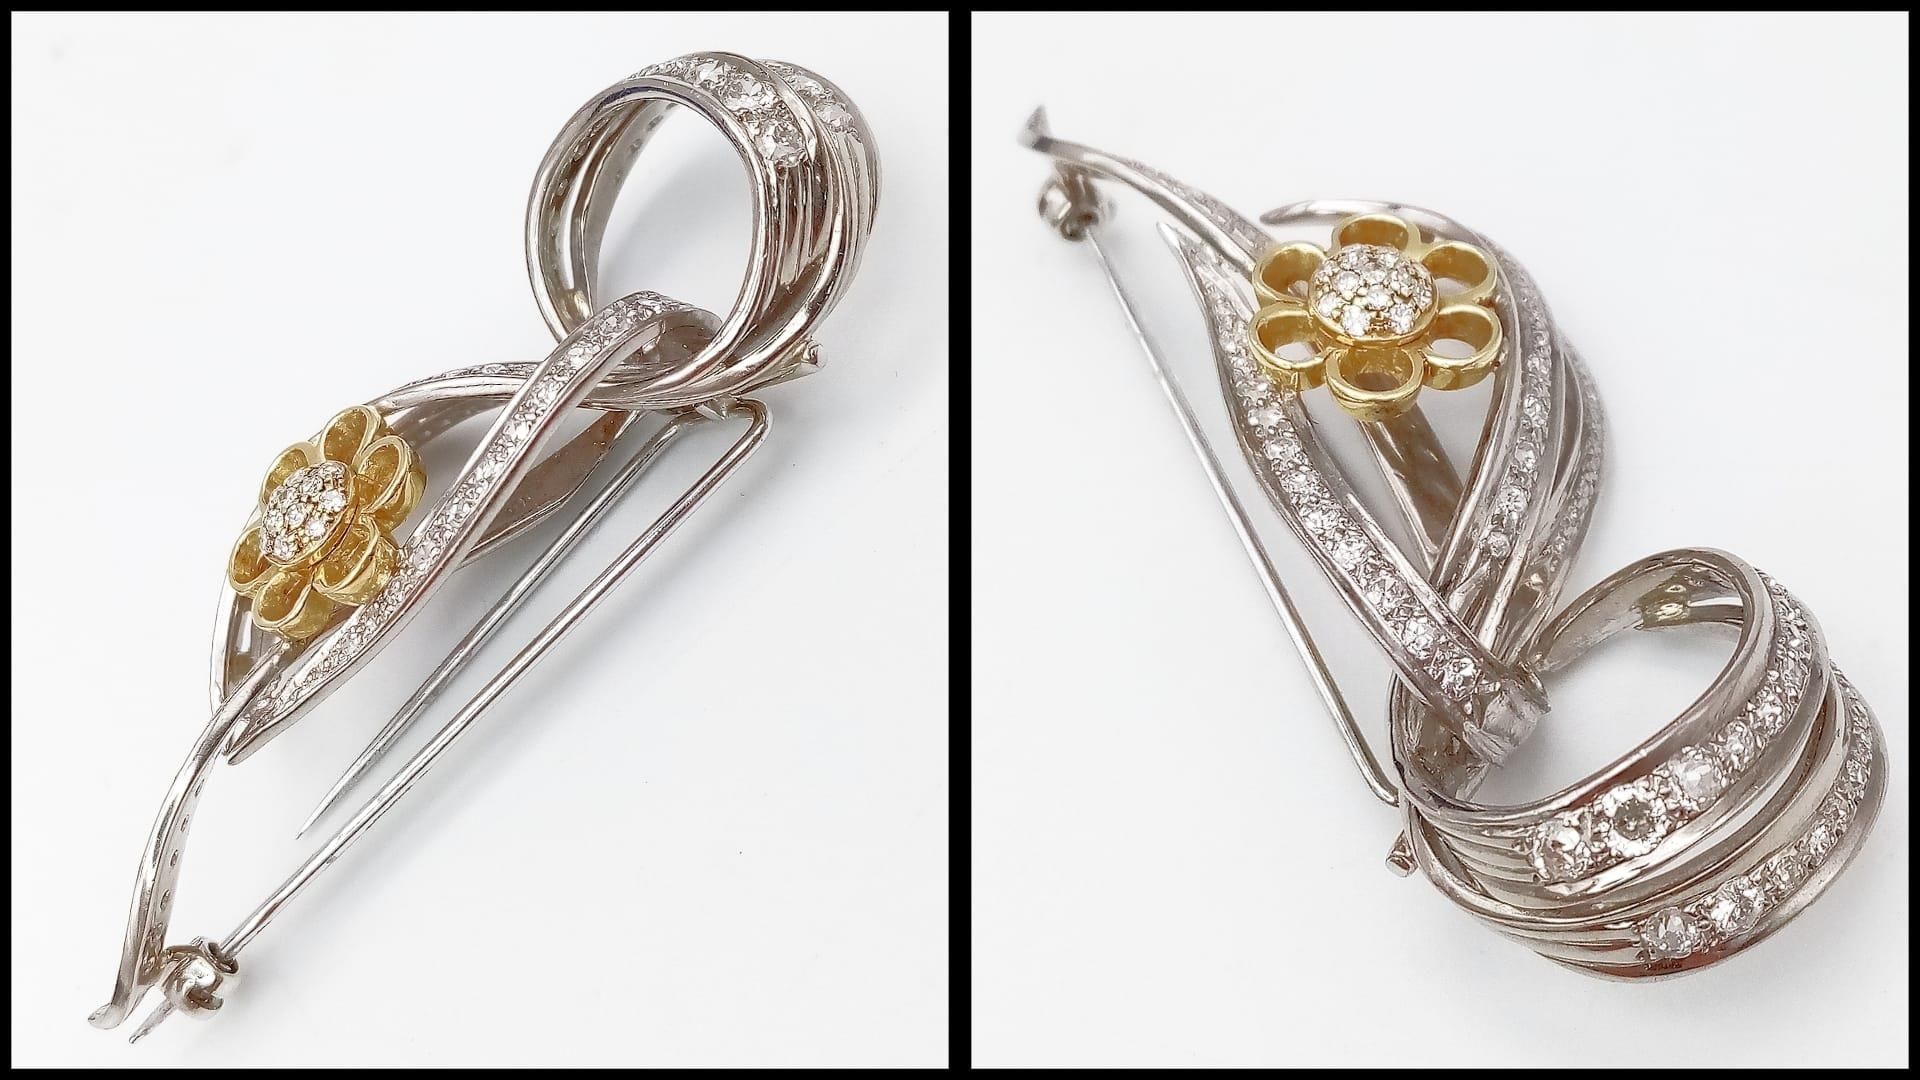 Diamond encrusted 18kt White & Yellow Gold Brooch. Beautifully woven White Gold design, adorned with - Image 4 of 6